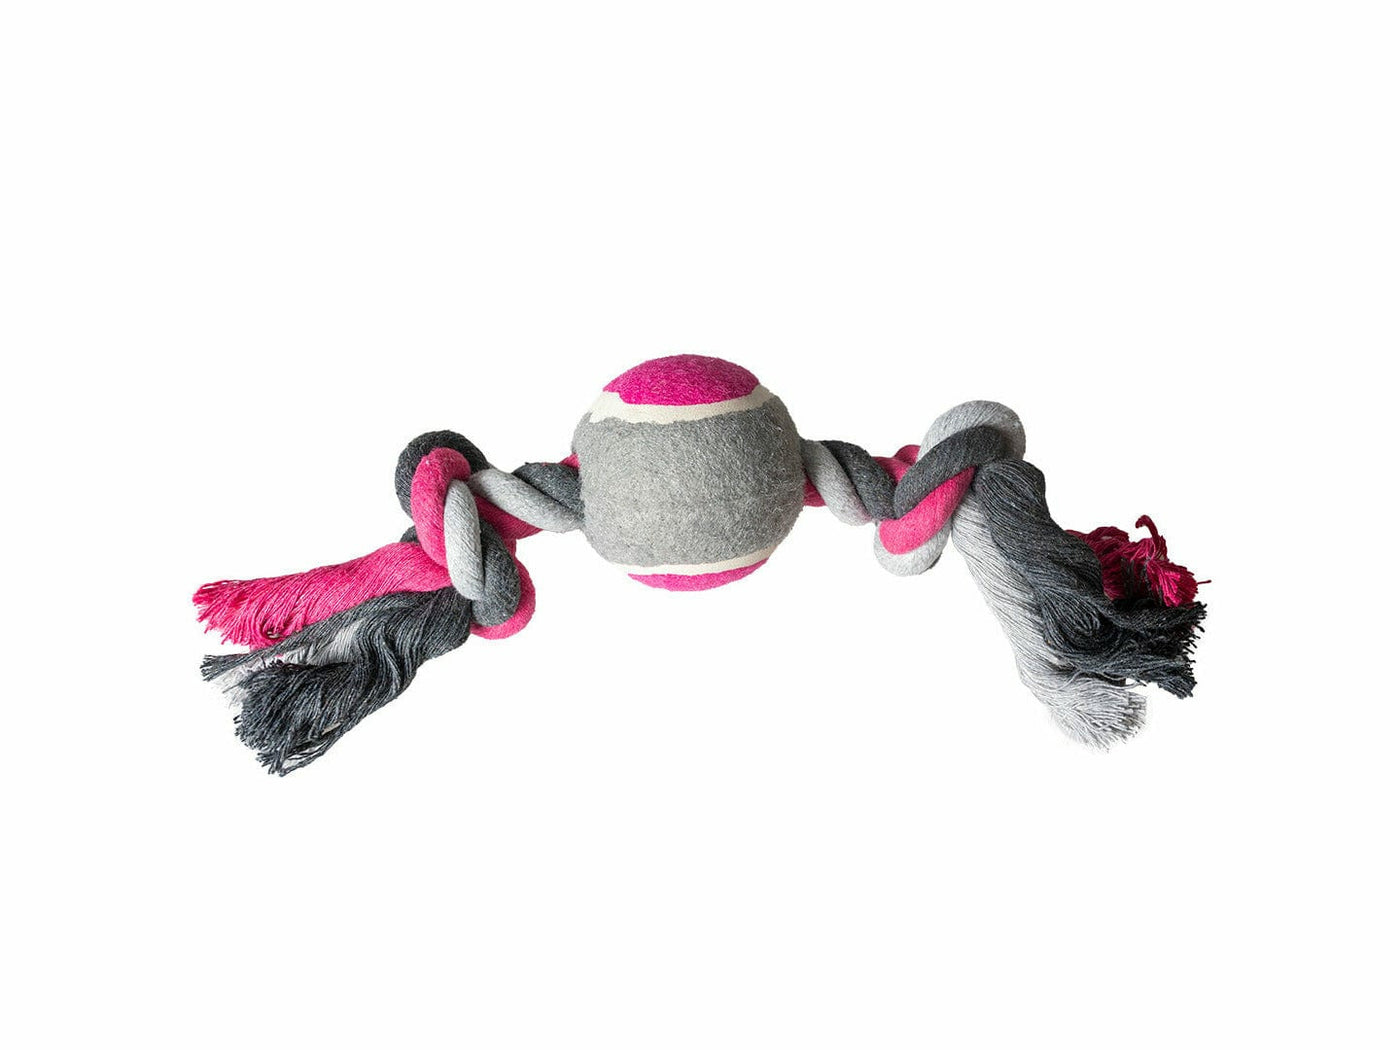 Tug Toy Knotted Cotton & 2Knots & Tennis Ball 30cm grey/pink